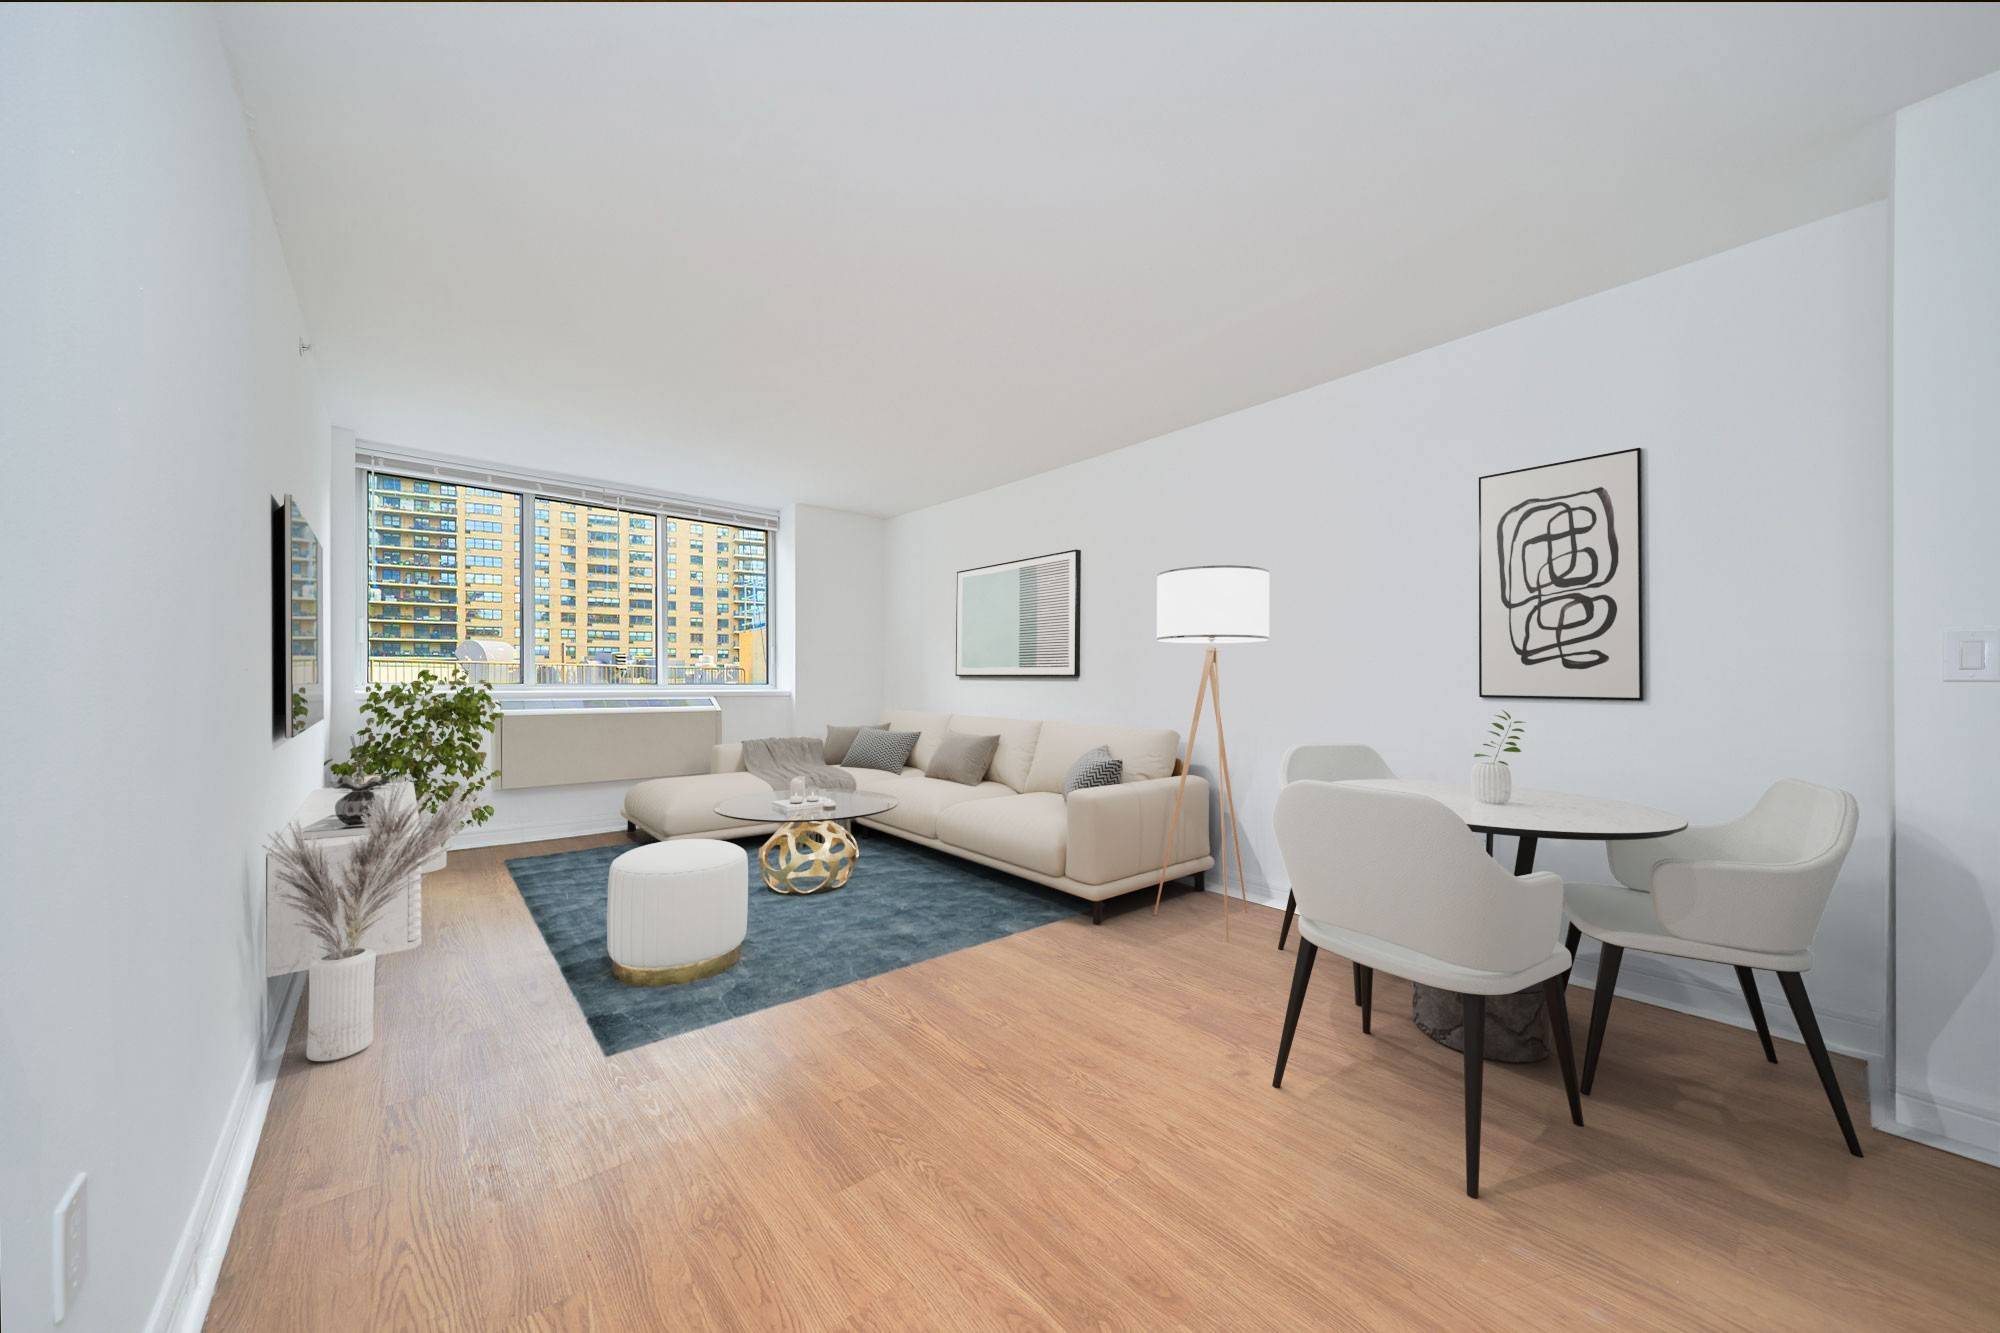 Massive 700 sq ft 1 Bedroom located in the heart of Lincoln Square in the iconic building at 160 Riverside Blvd.